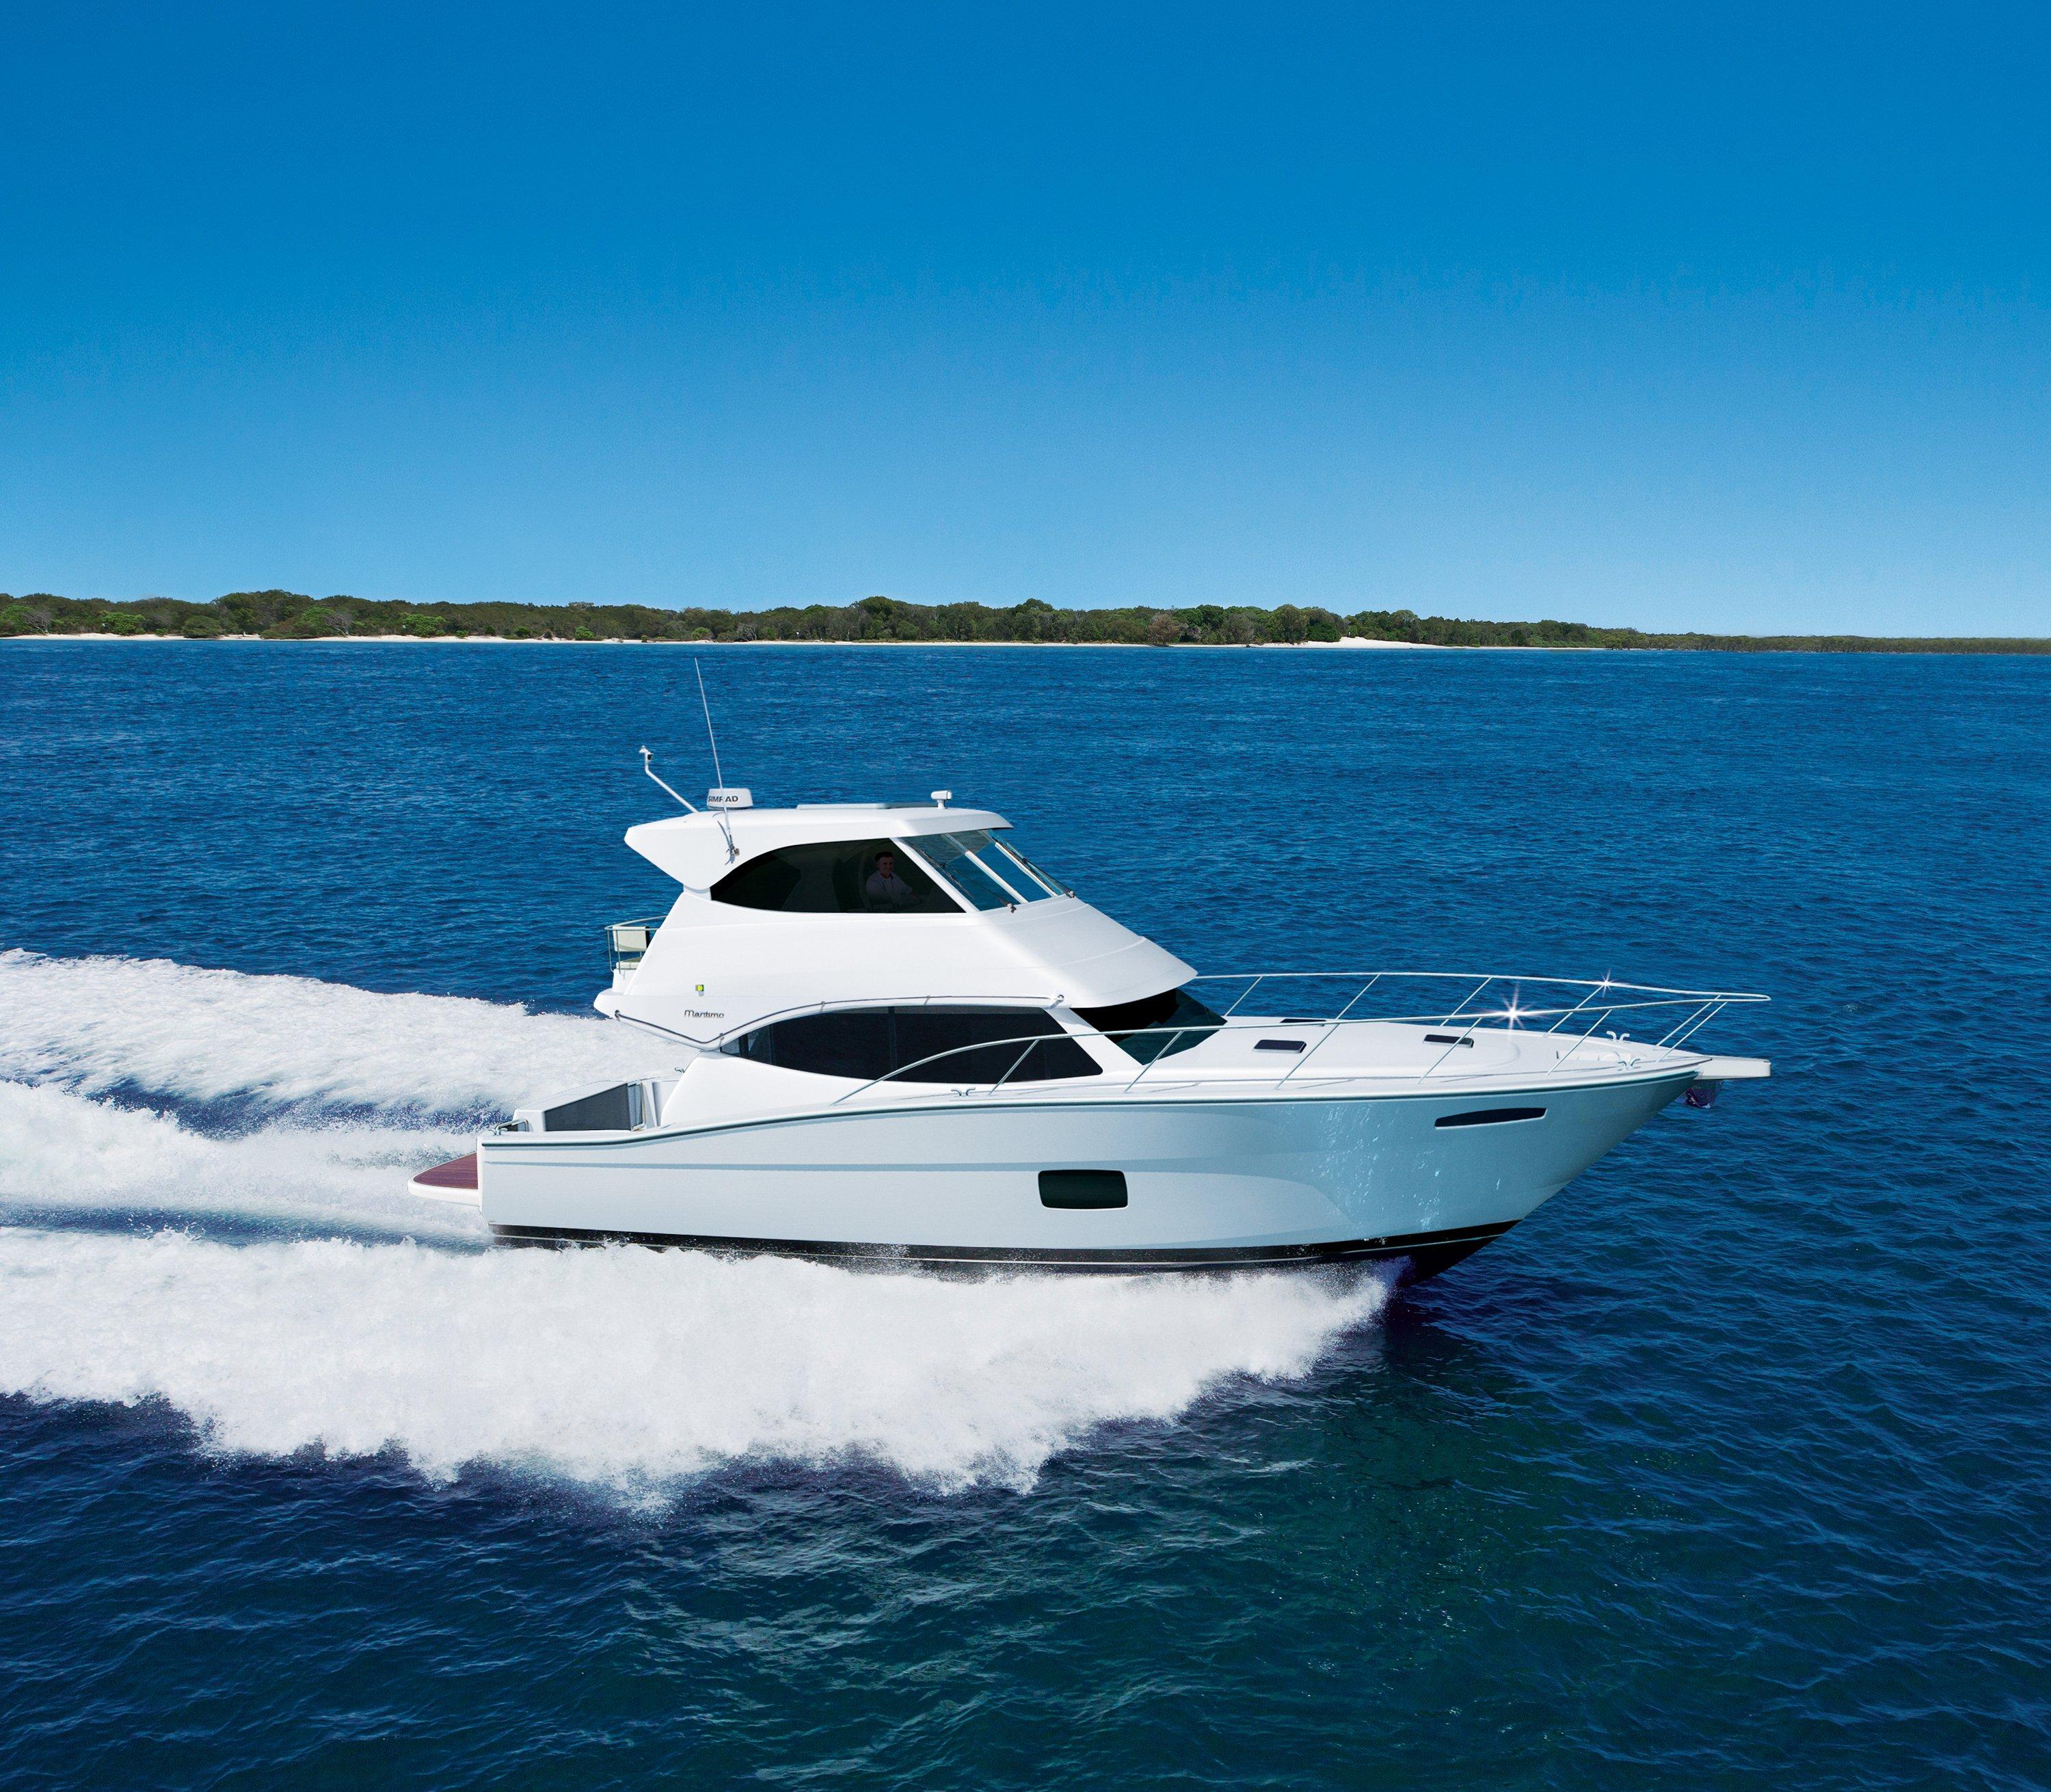 NEW BOATS - Maritimo to commence production on a 45ft cruiser